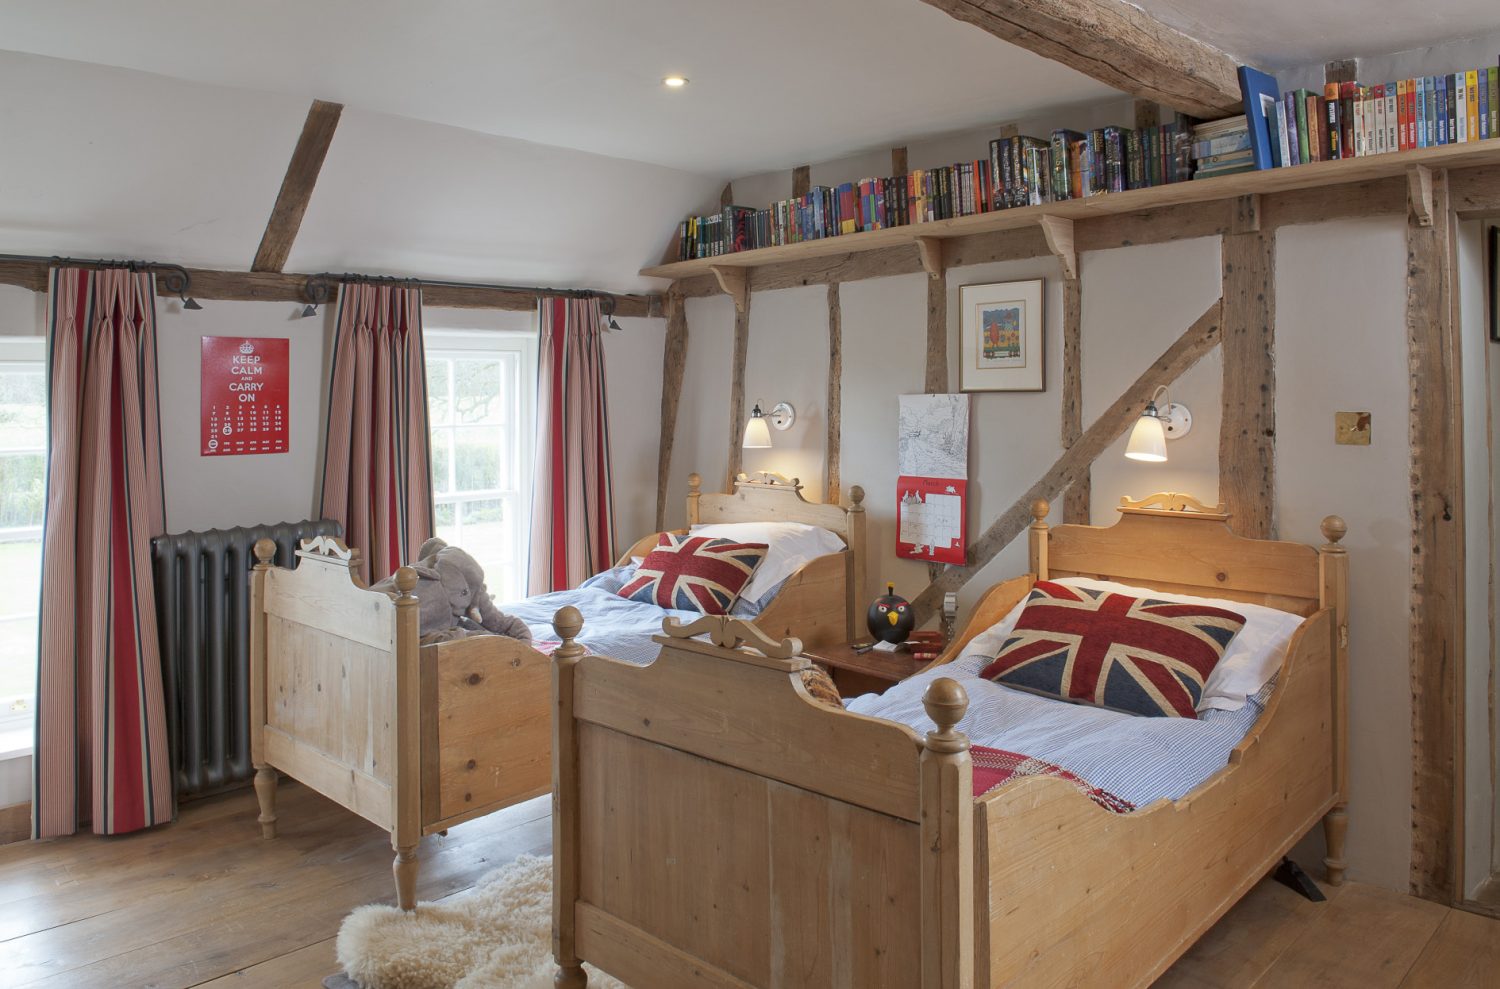 In Oscar’s room, further along the landing, twin pine sleigh beds are covered with blue and white gingham quilts, Union Jack cushions and red and white checked blankets